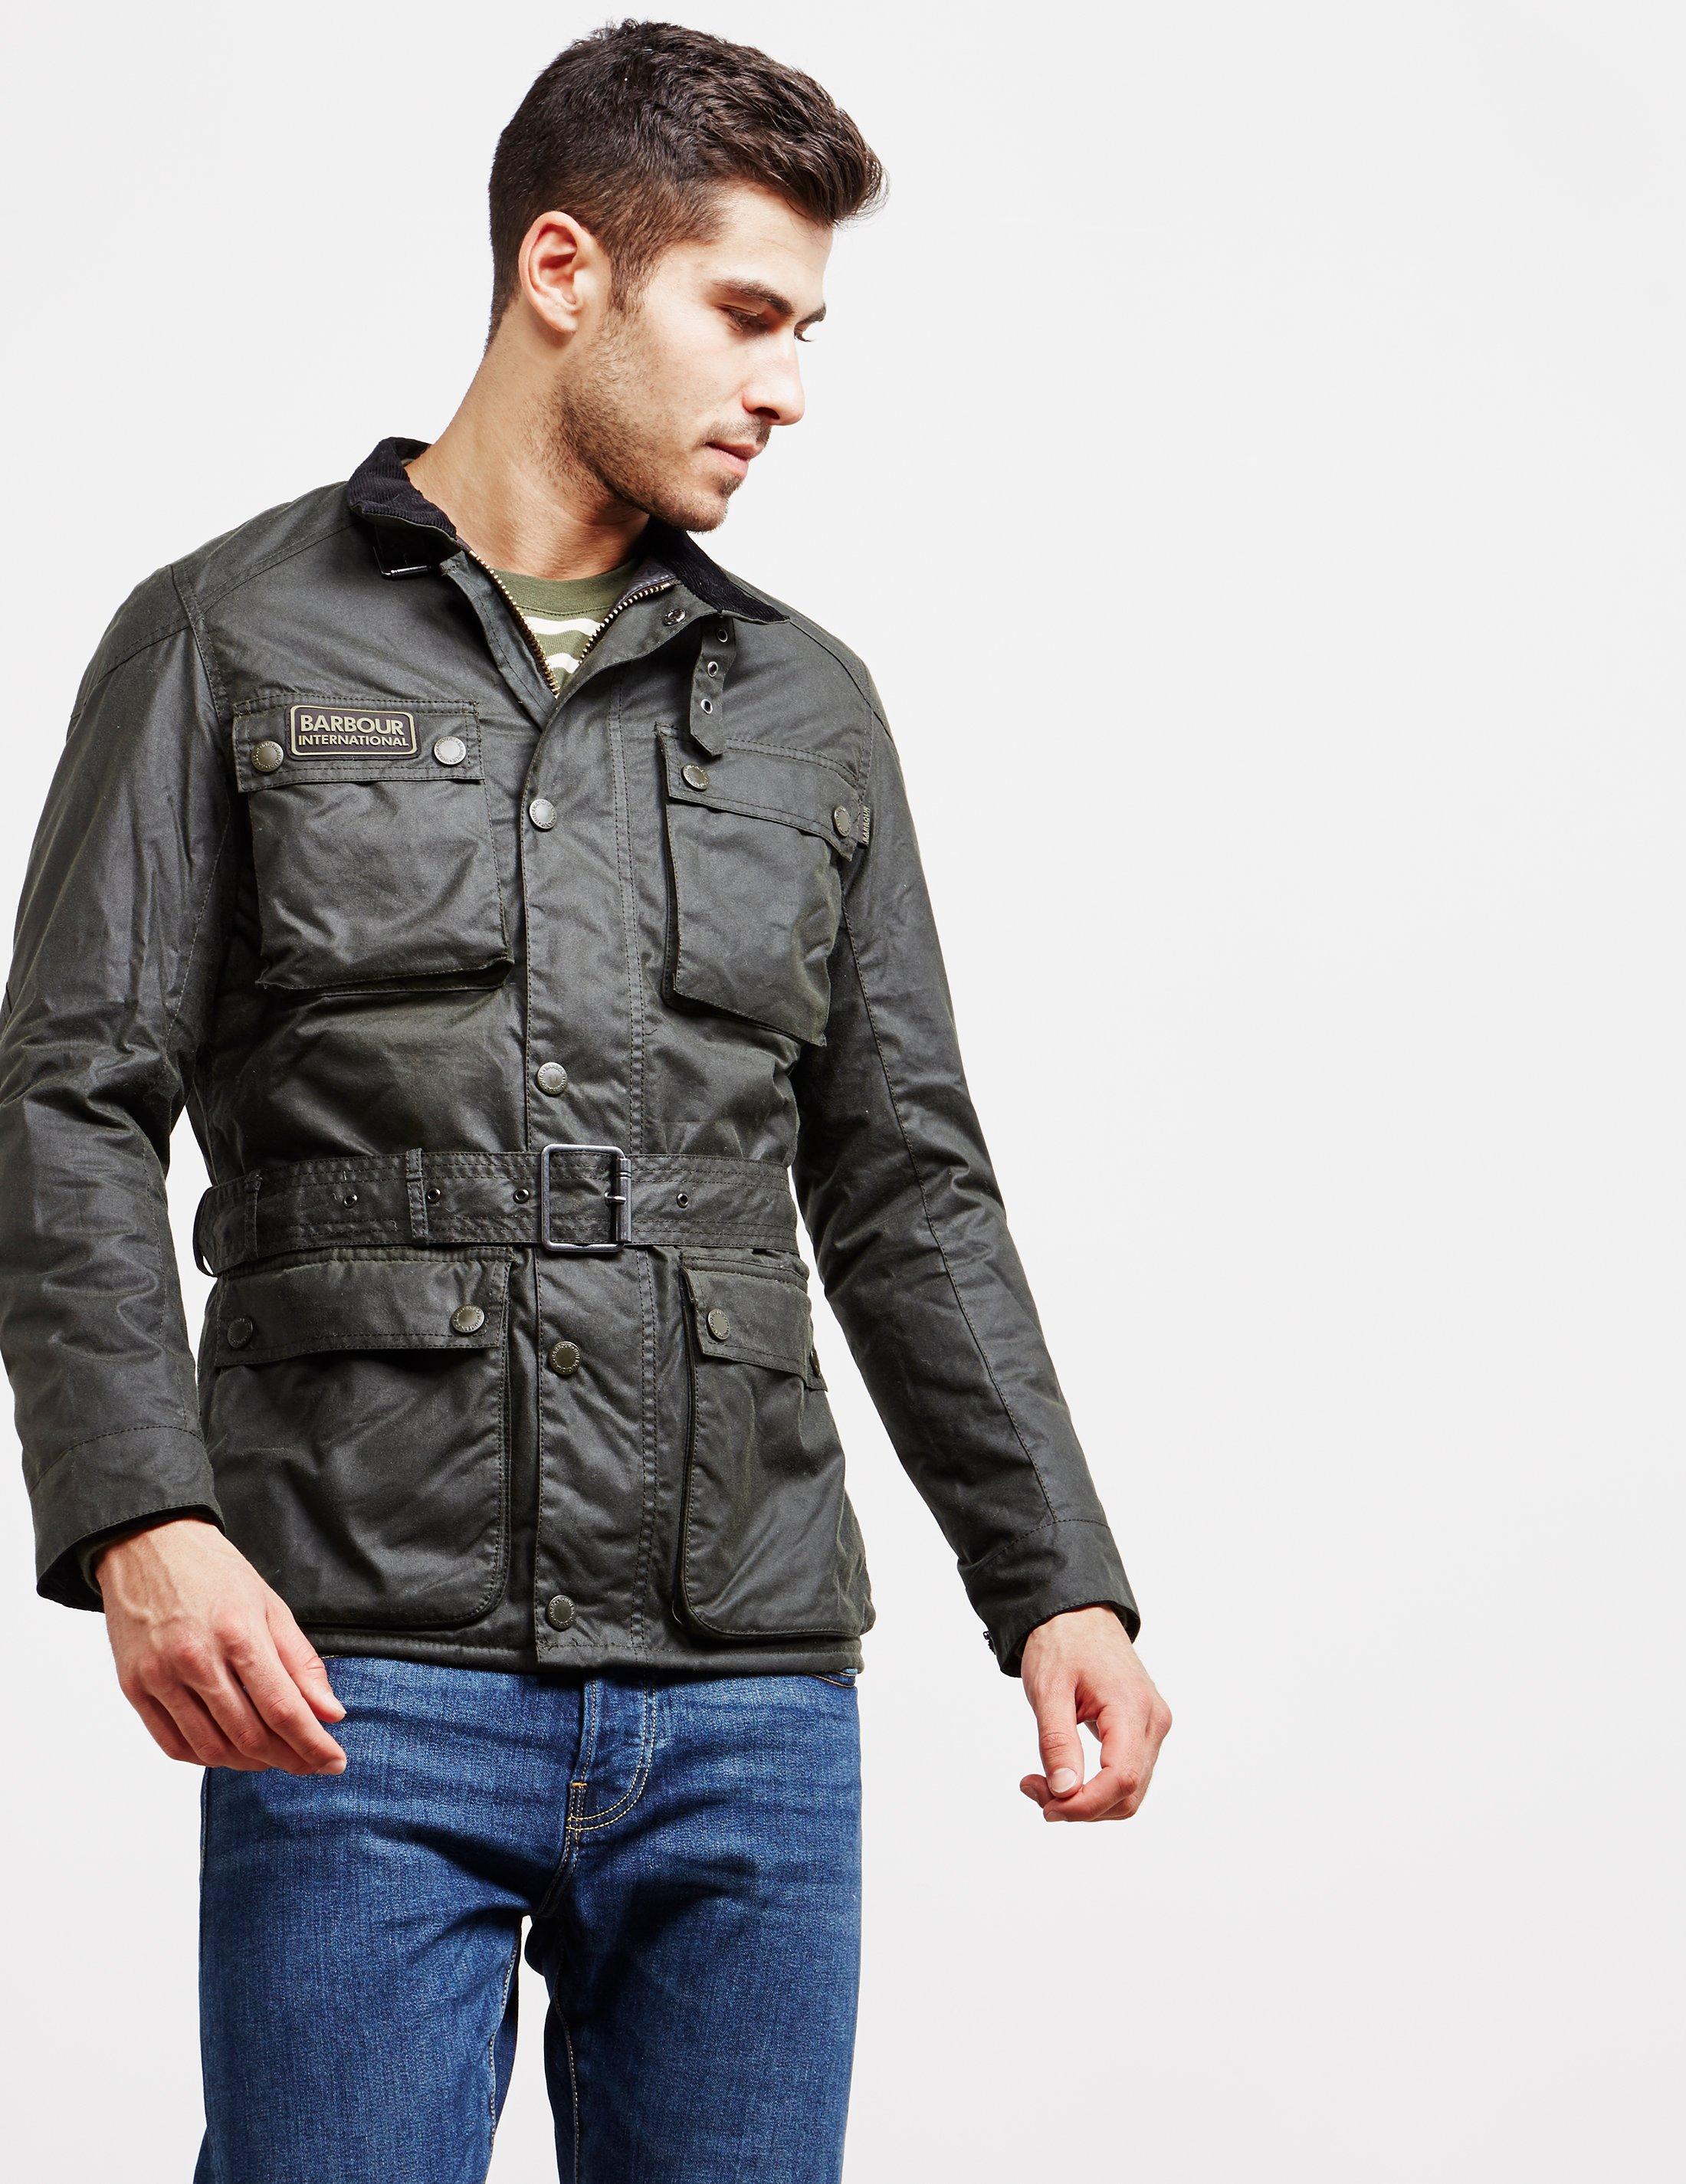 Barbour Blackwell Jacket Hotsell, SAVE 57%.